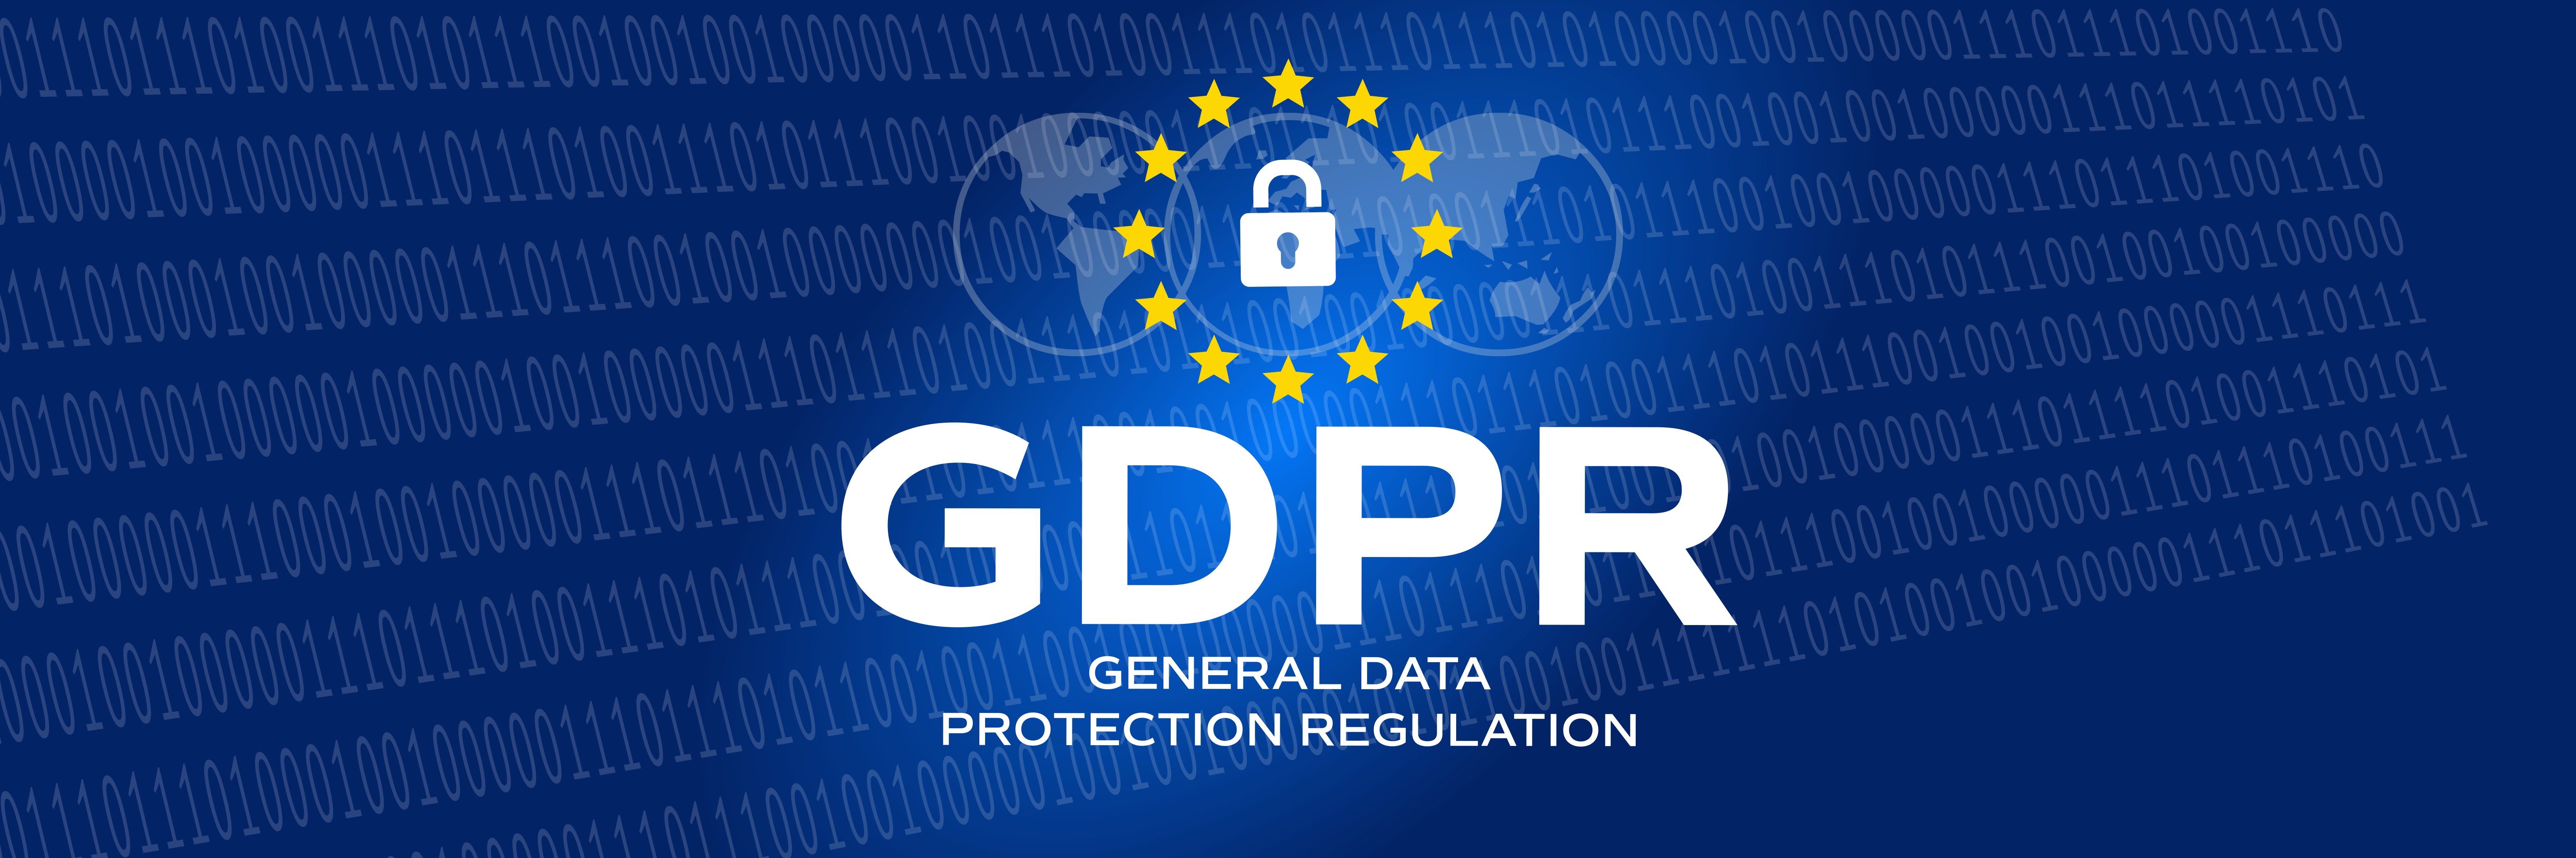 New GDPR standard contractual clauses (SCCs) issued by the European Commission